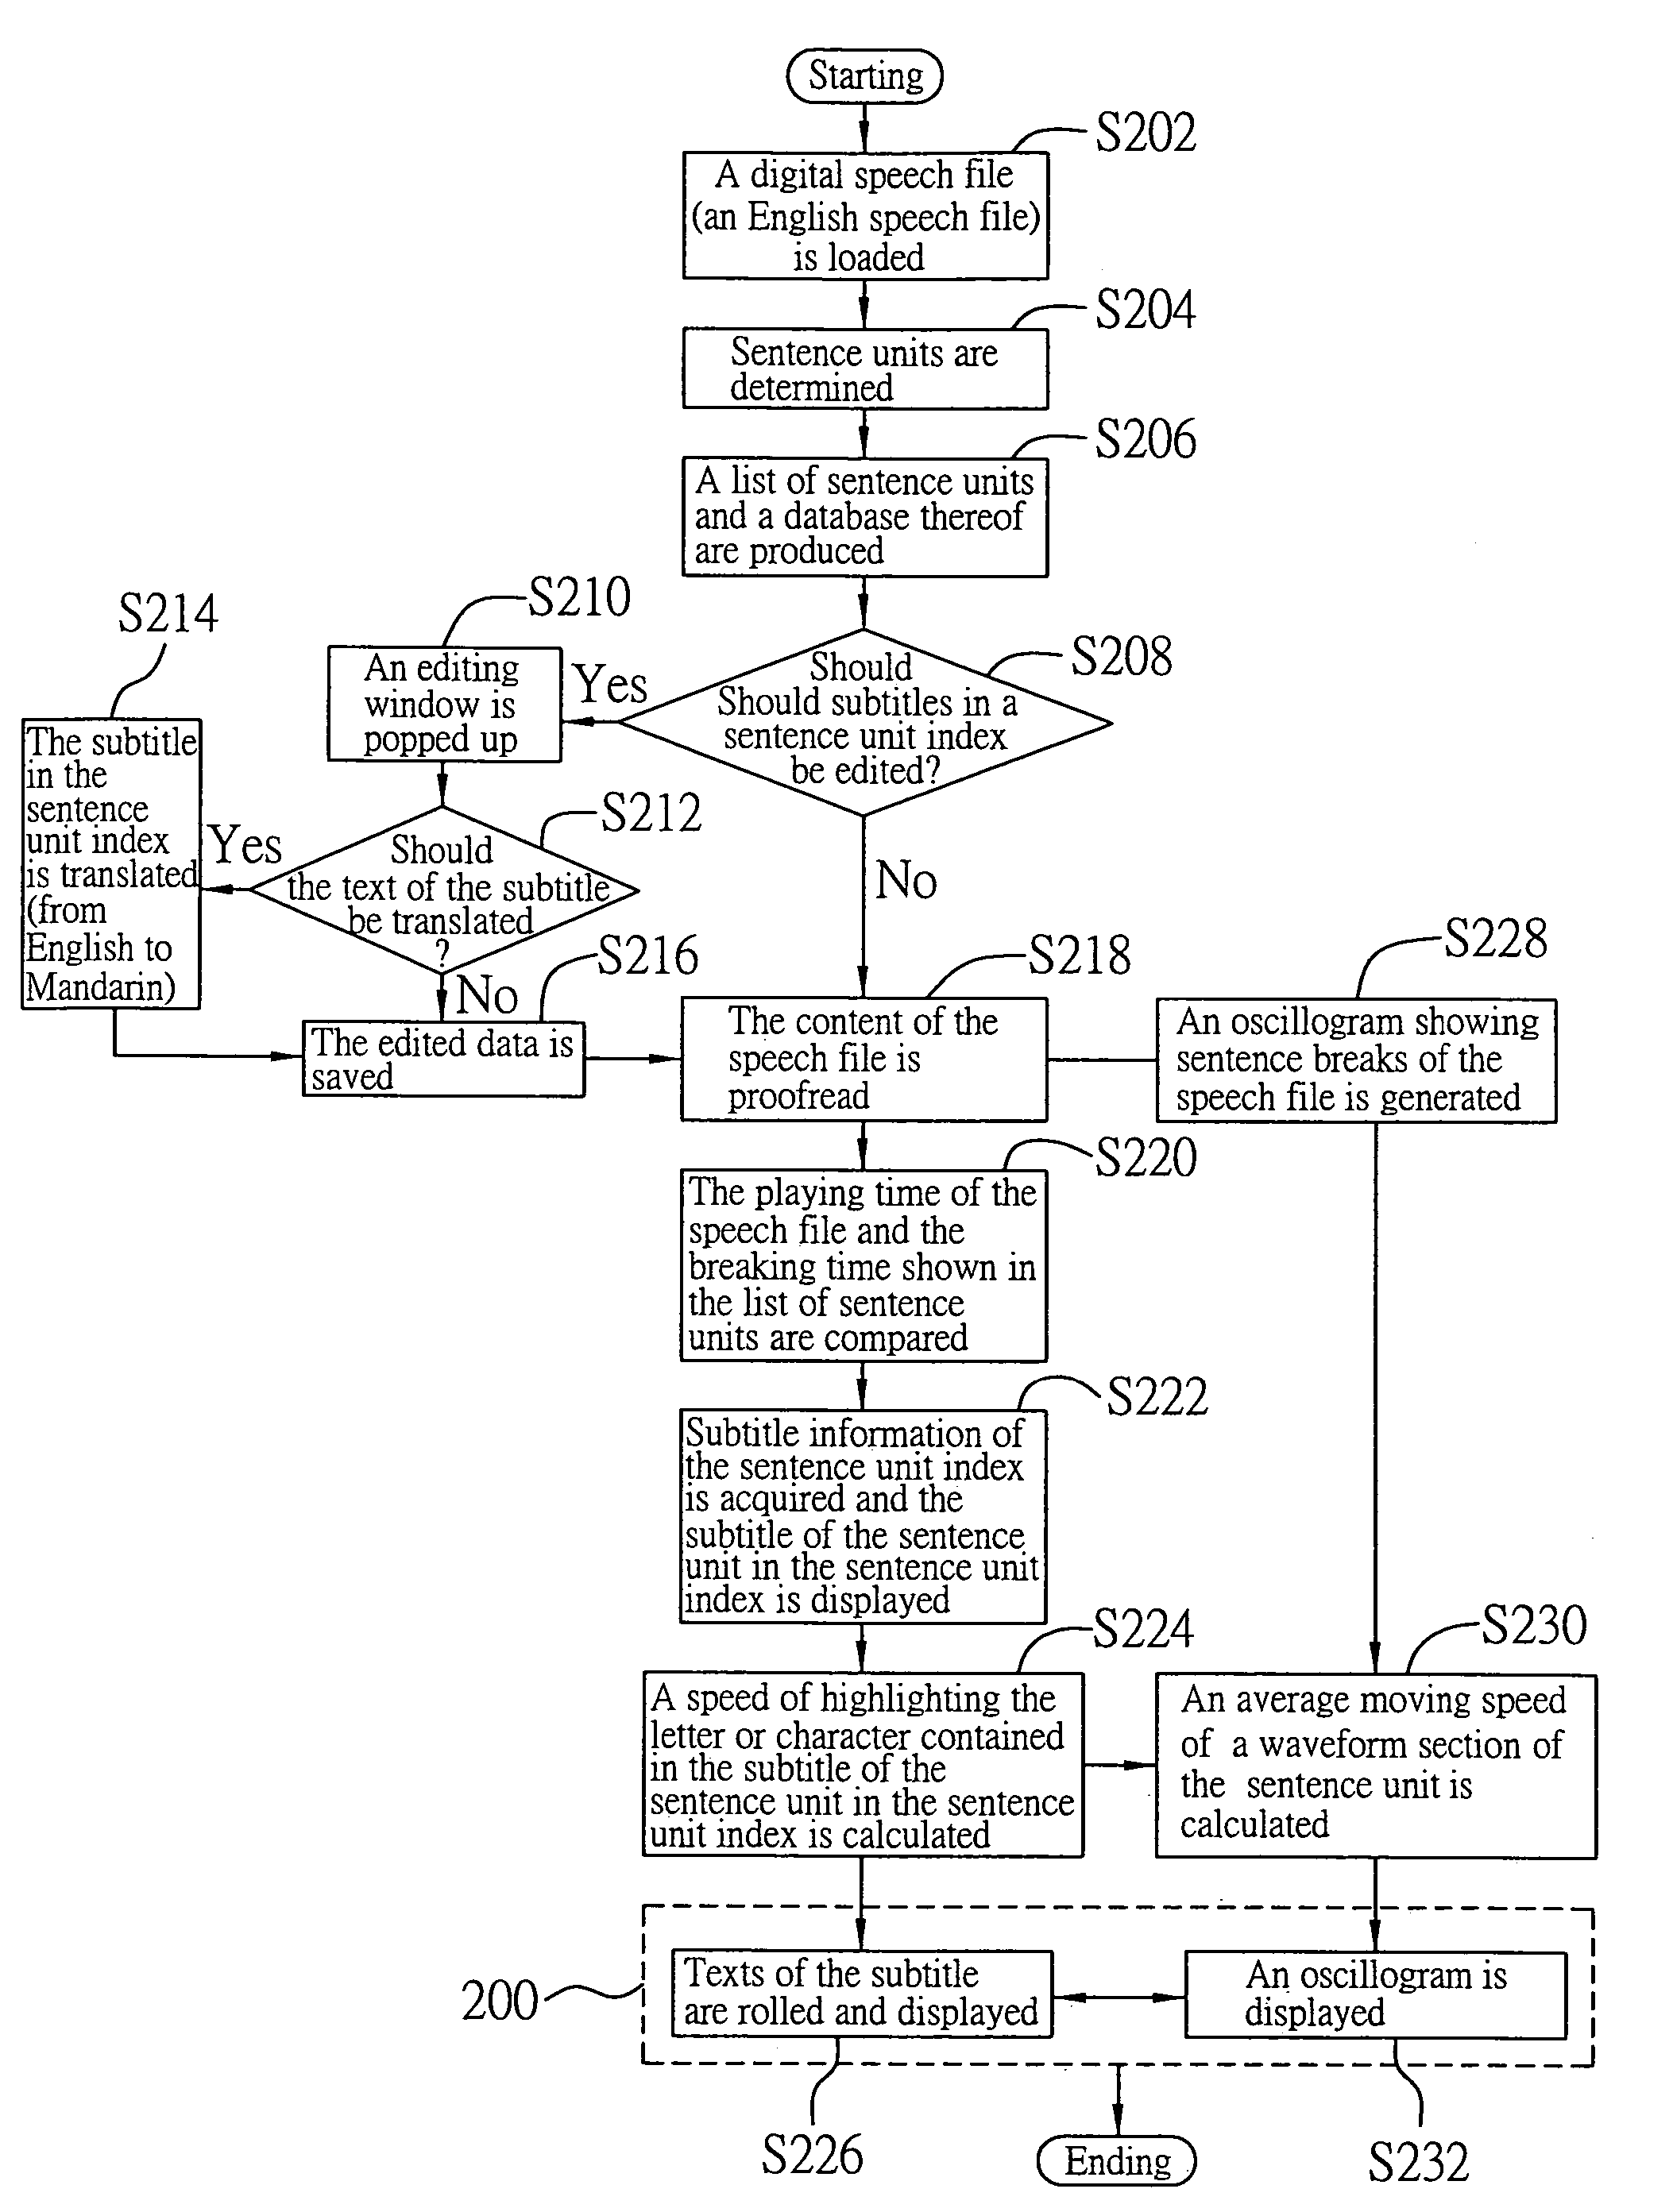 Speech displaying system and method